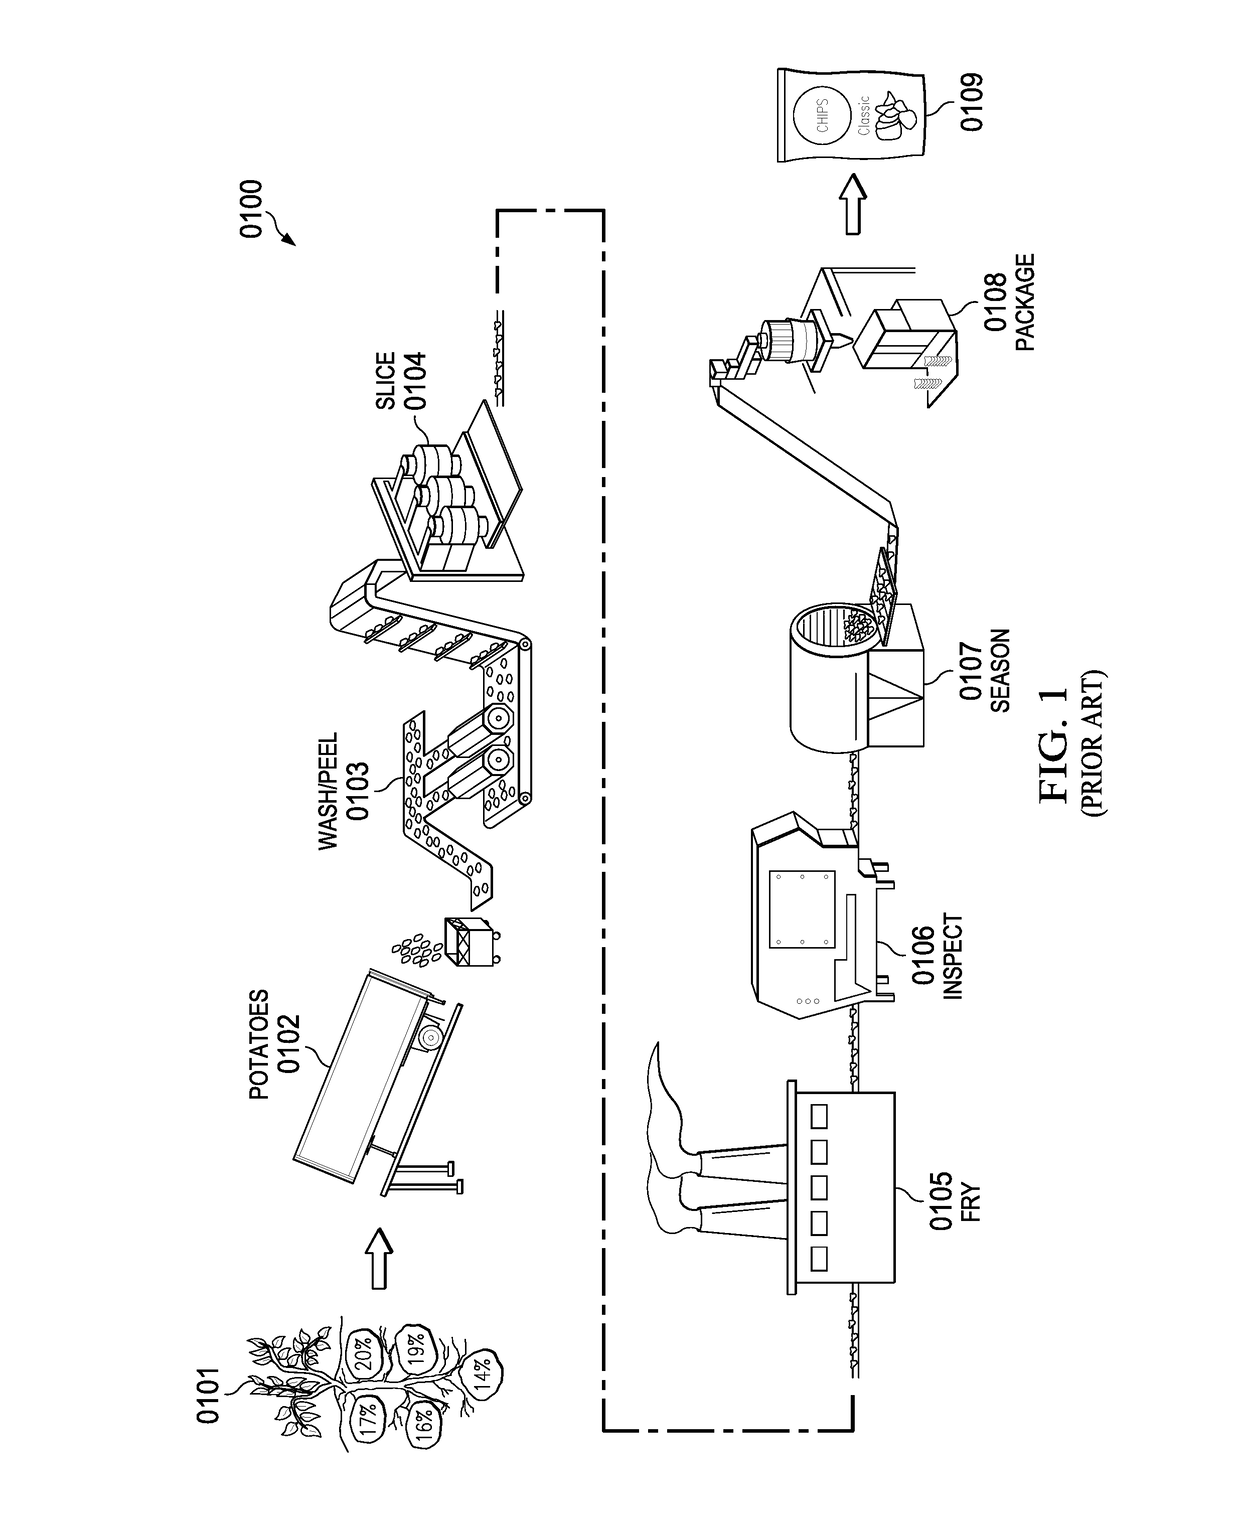 Feedback control of food texture system and method